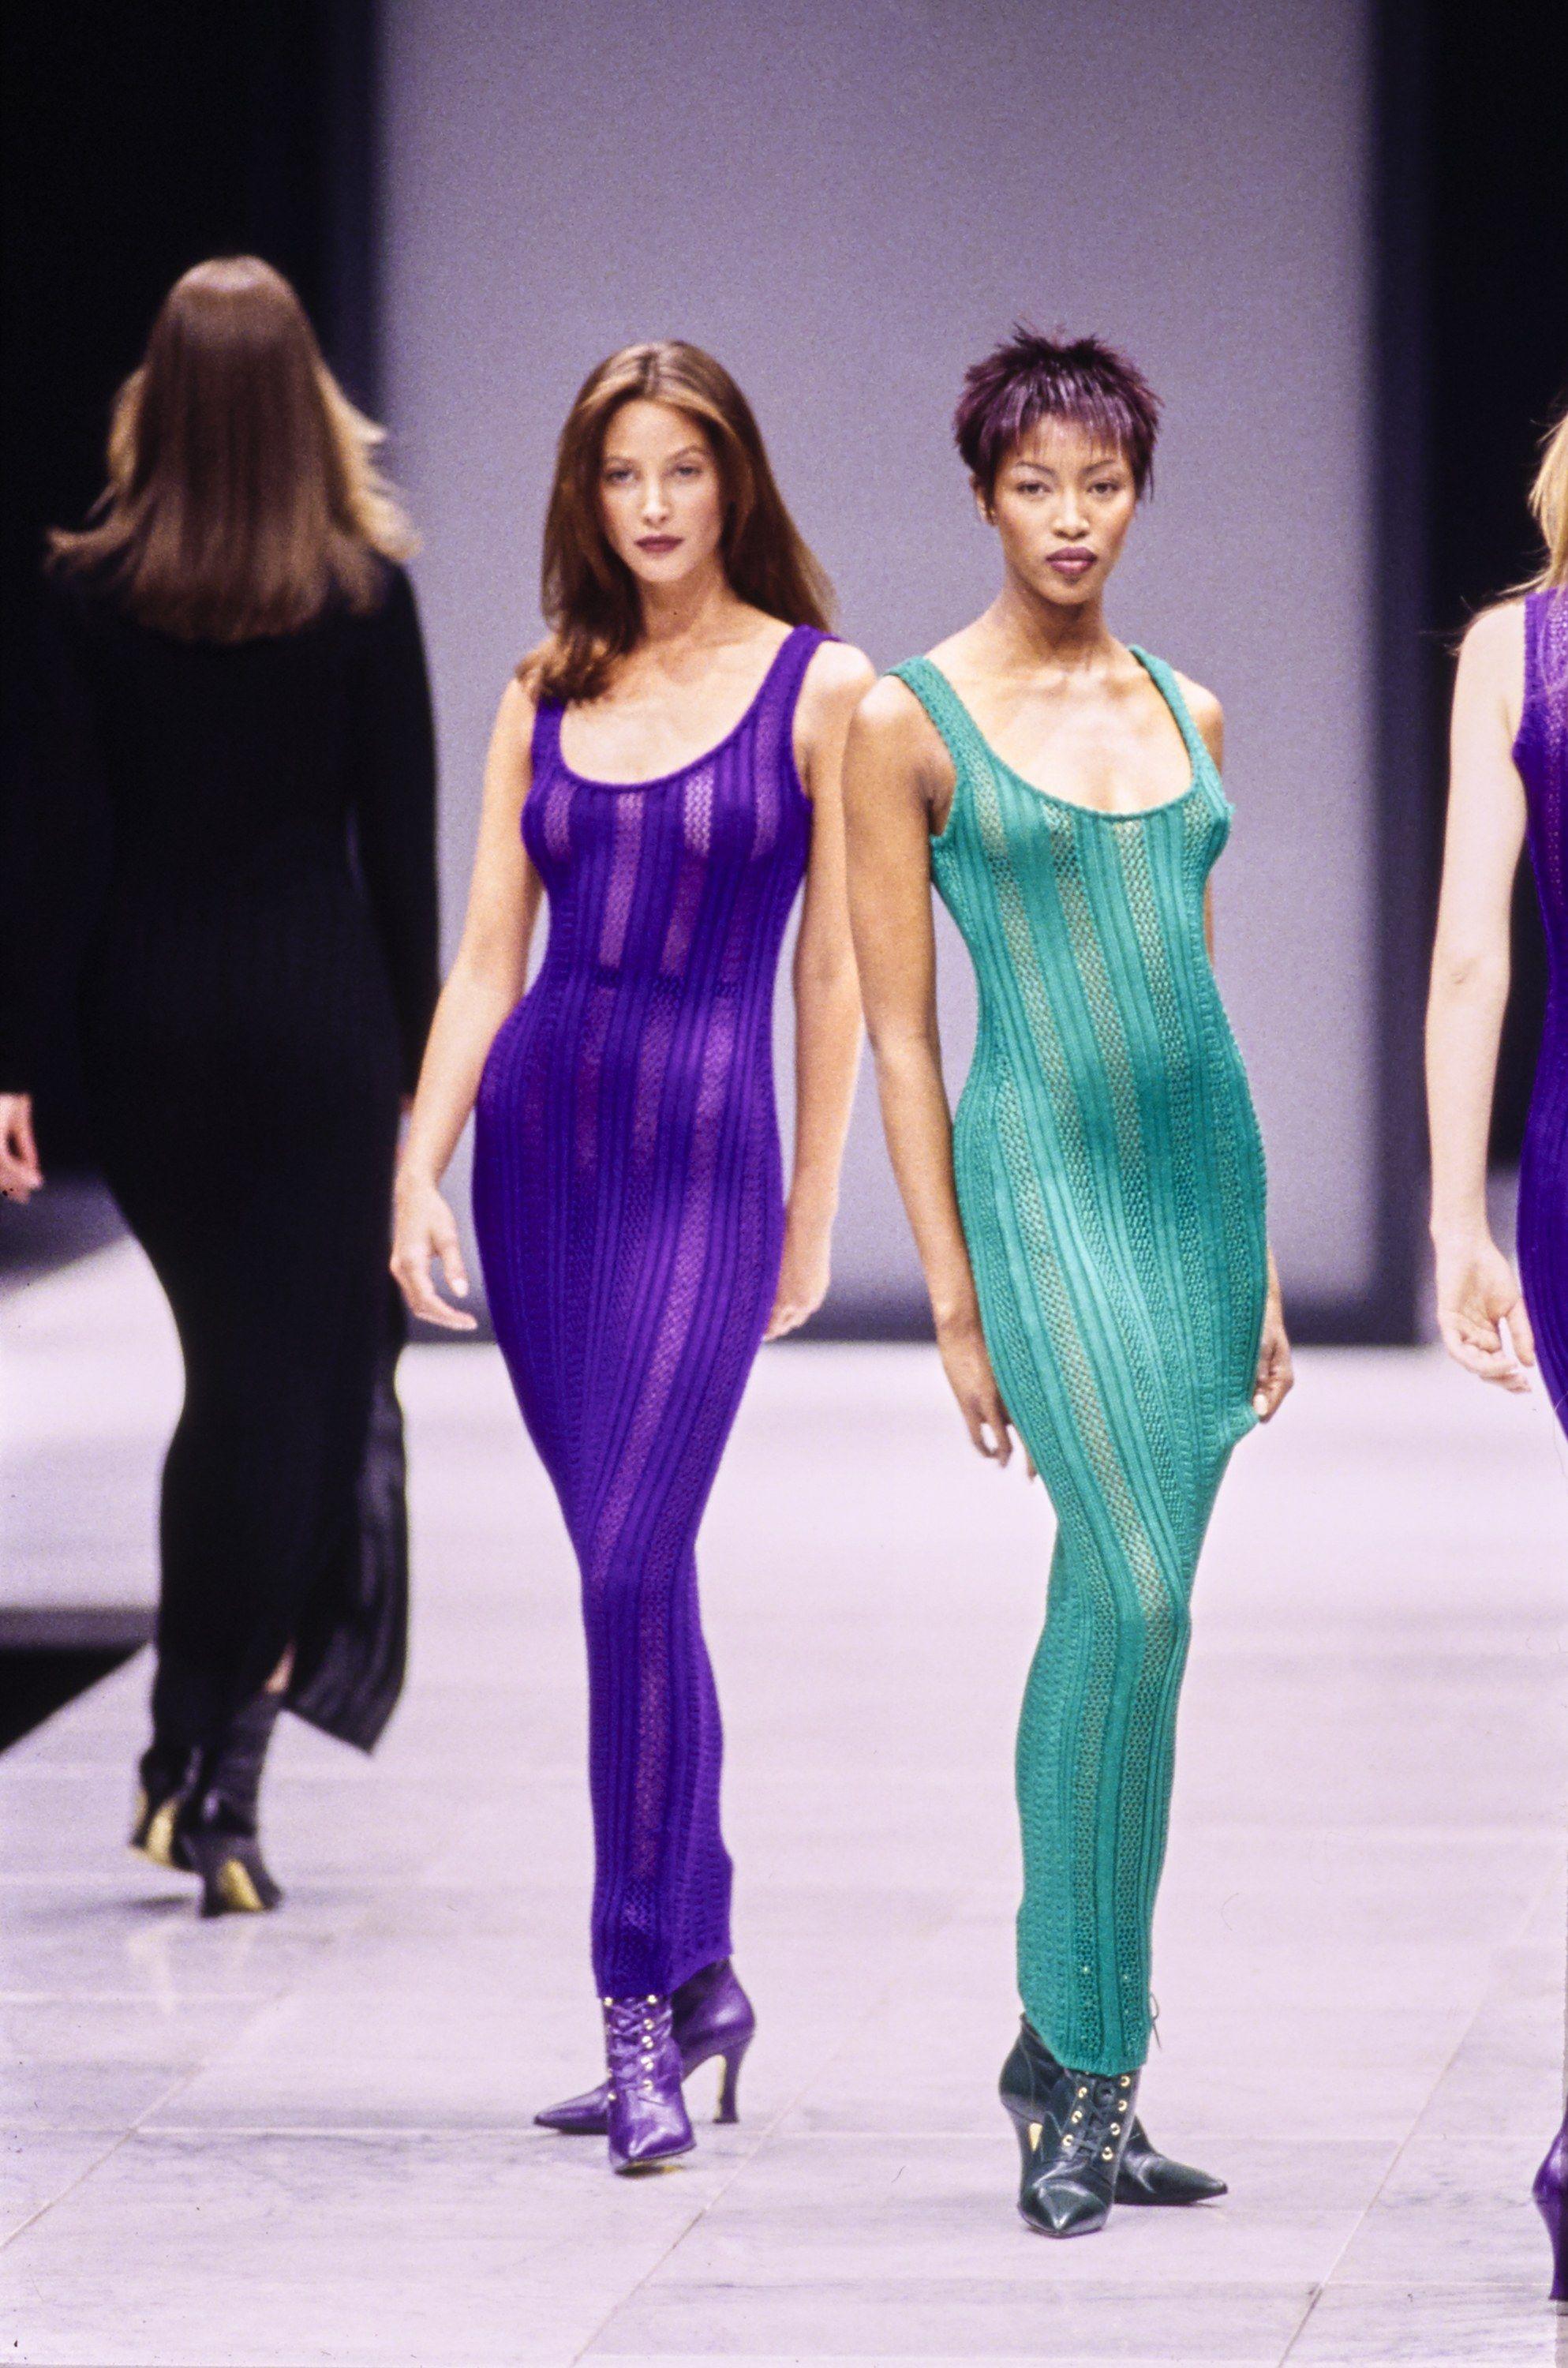 Presenting a sexy take on a knit dress, designed by Gianni Versace. Debuted as look number 32 on the Fall/Winter 1993 runway, modeled by Naomi Campbell, this set speaks for itself! Constructed of a knit/crochet fabric with a sheer matching slip